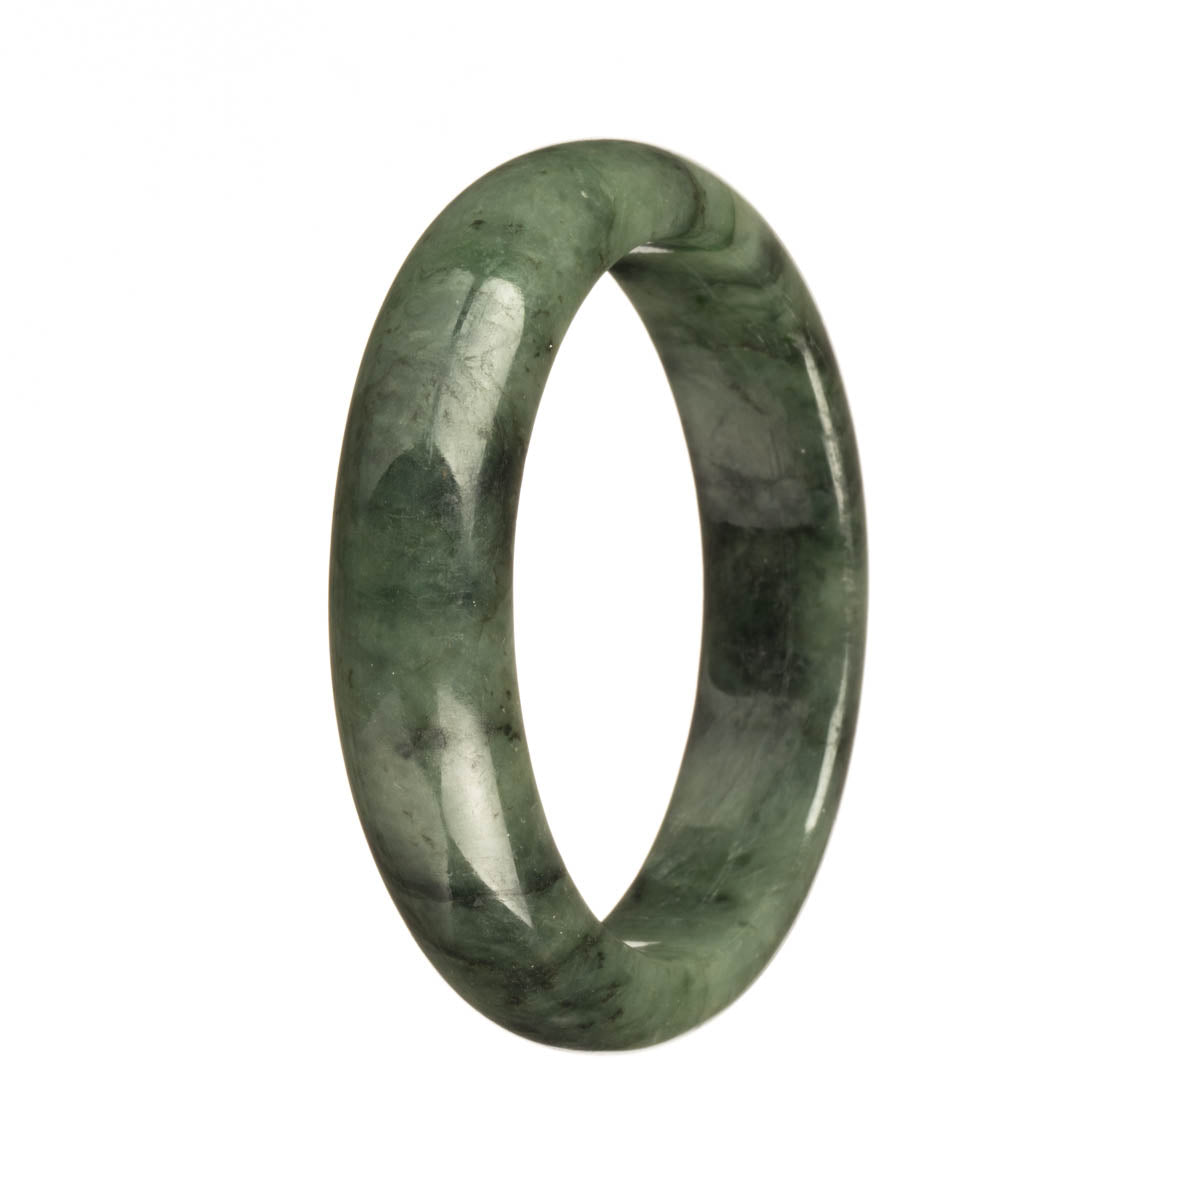 Close-up of a green jadeite bracelet with dark green patterns. The bracelet has a half moon shape and is 57mm in size.